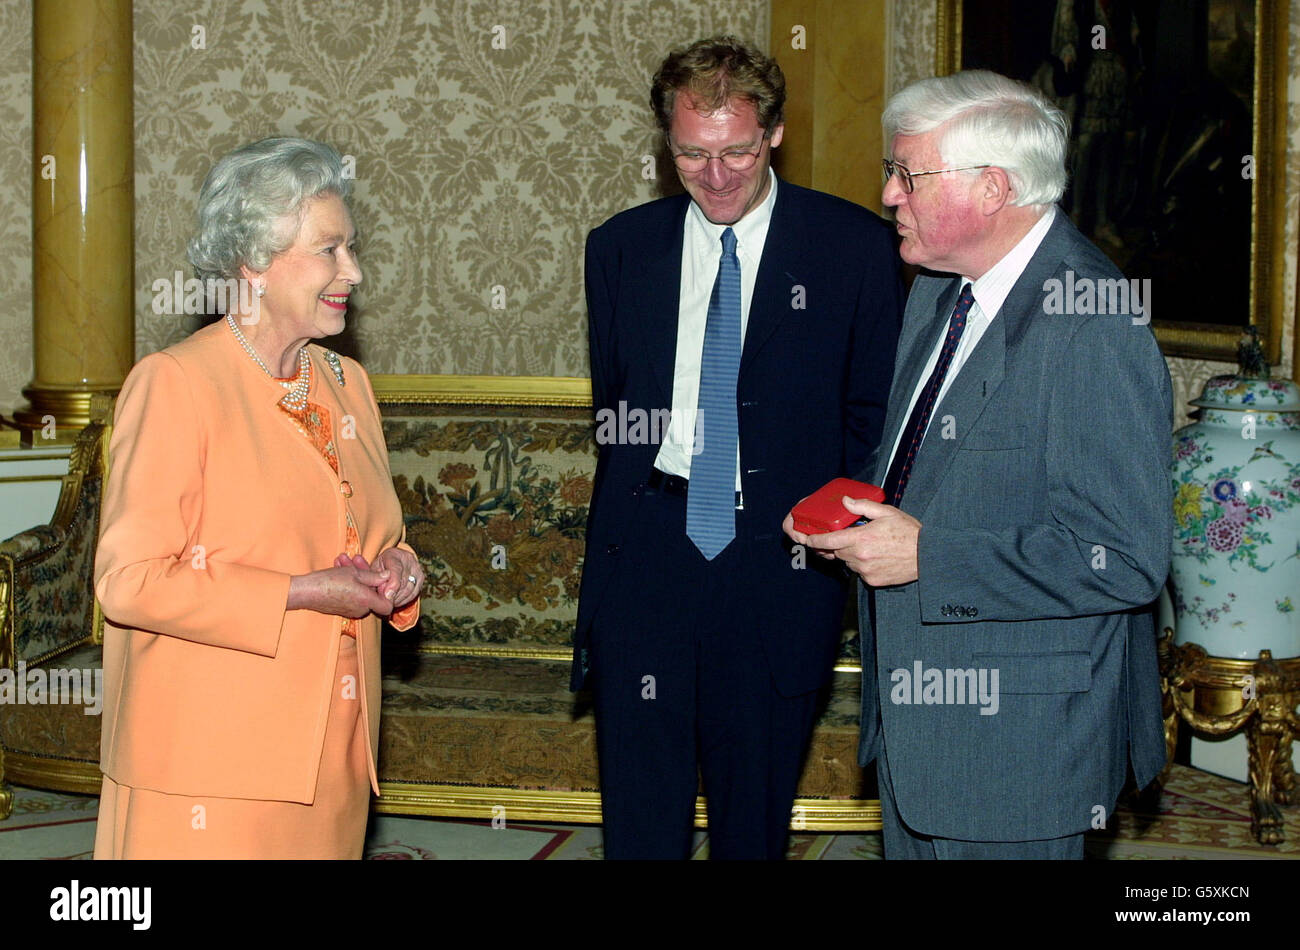 Britain's Queen Elizabeth II presents Peter Porter with her Gold Medal for Poetry during an audience at Buckingham Palace in London, also attended by Poet Laureate Andrew Motion (centre). * ... Born in Brisbane, Australia, in 1929, he has been writing poetry since he left school. In 1983, he won the Duff Cooper Memorial Prize for his first book of collected poems and in 1988 he won the Whitbread Poetry Award for the Automatic Oracle. The Gold Medal for Poetry was instituted by King George V in 1933 at thesuggestion of the then Poet Laureate, Dr John Masefield. Stock Photo